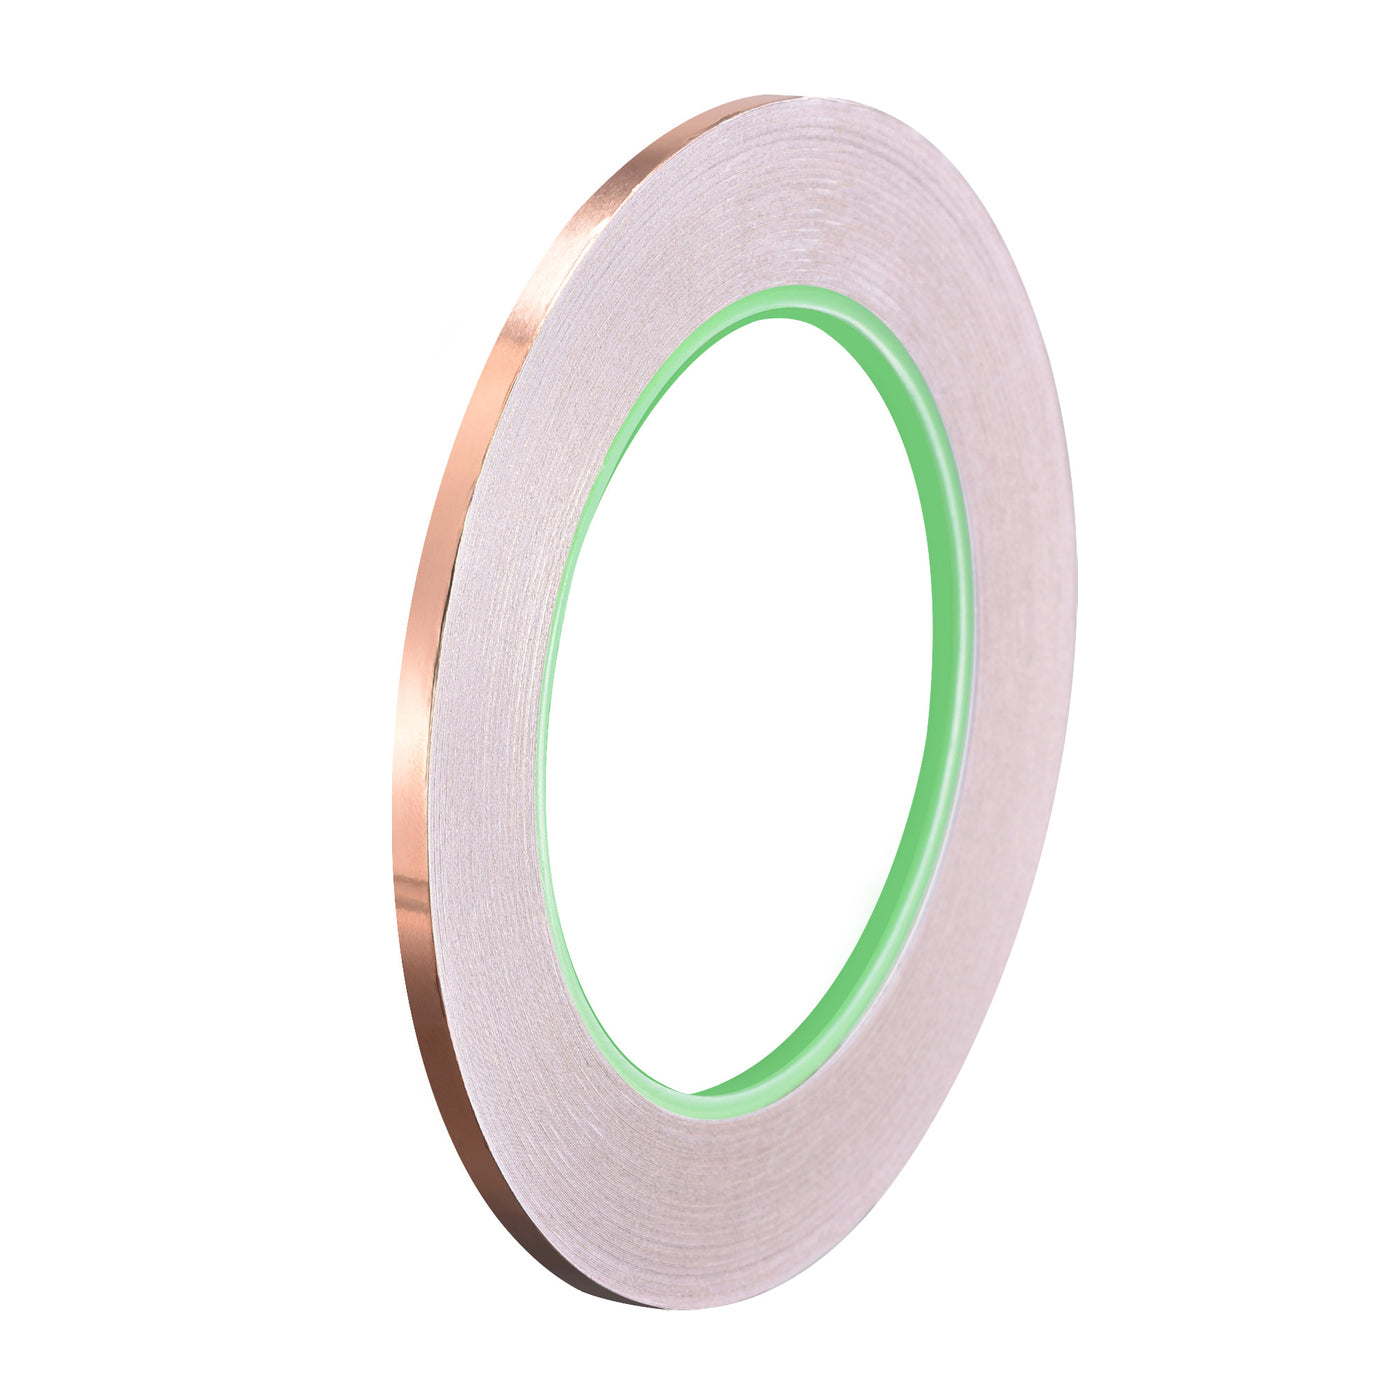 Uxcell Uxcell Double-Sided Conductive Tape Copper Foil Tape 20mm x 30m/98.4ft 1pcs